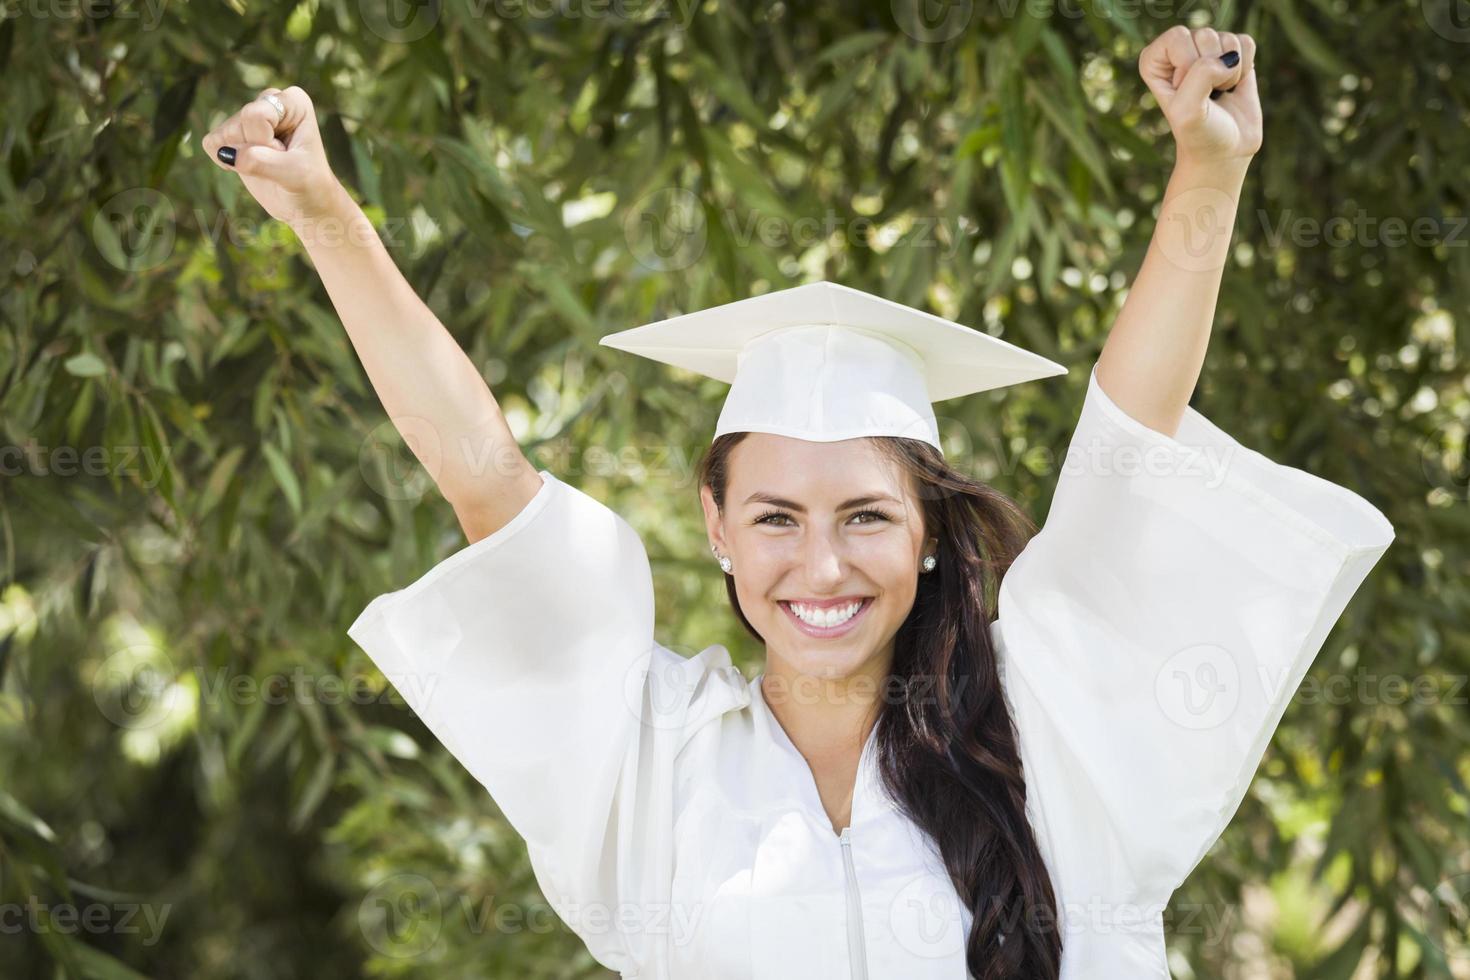 Happy Graduating Mixed Race Girl In Cap and Gown photo